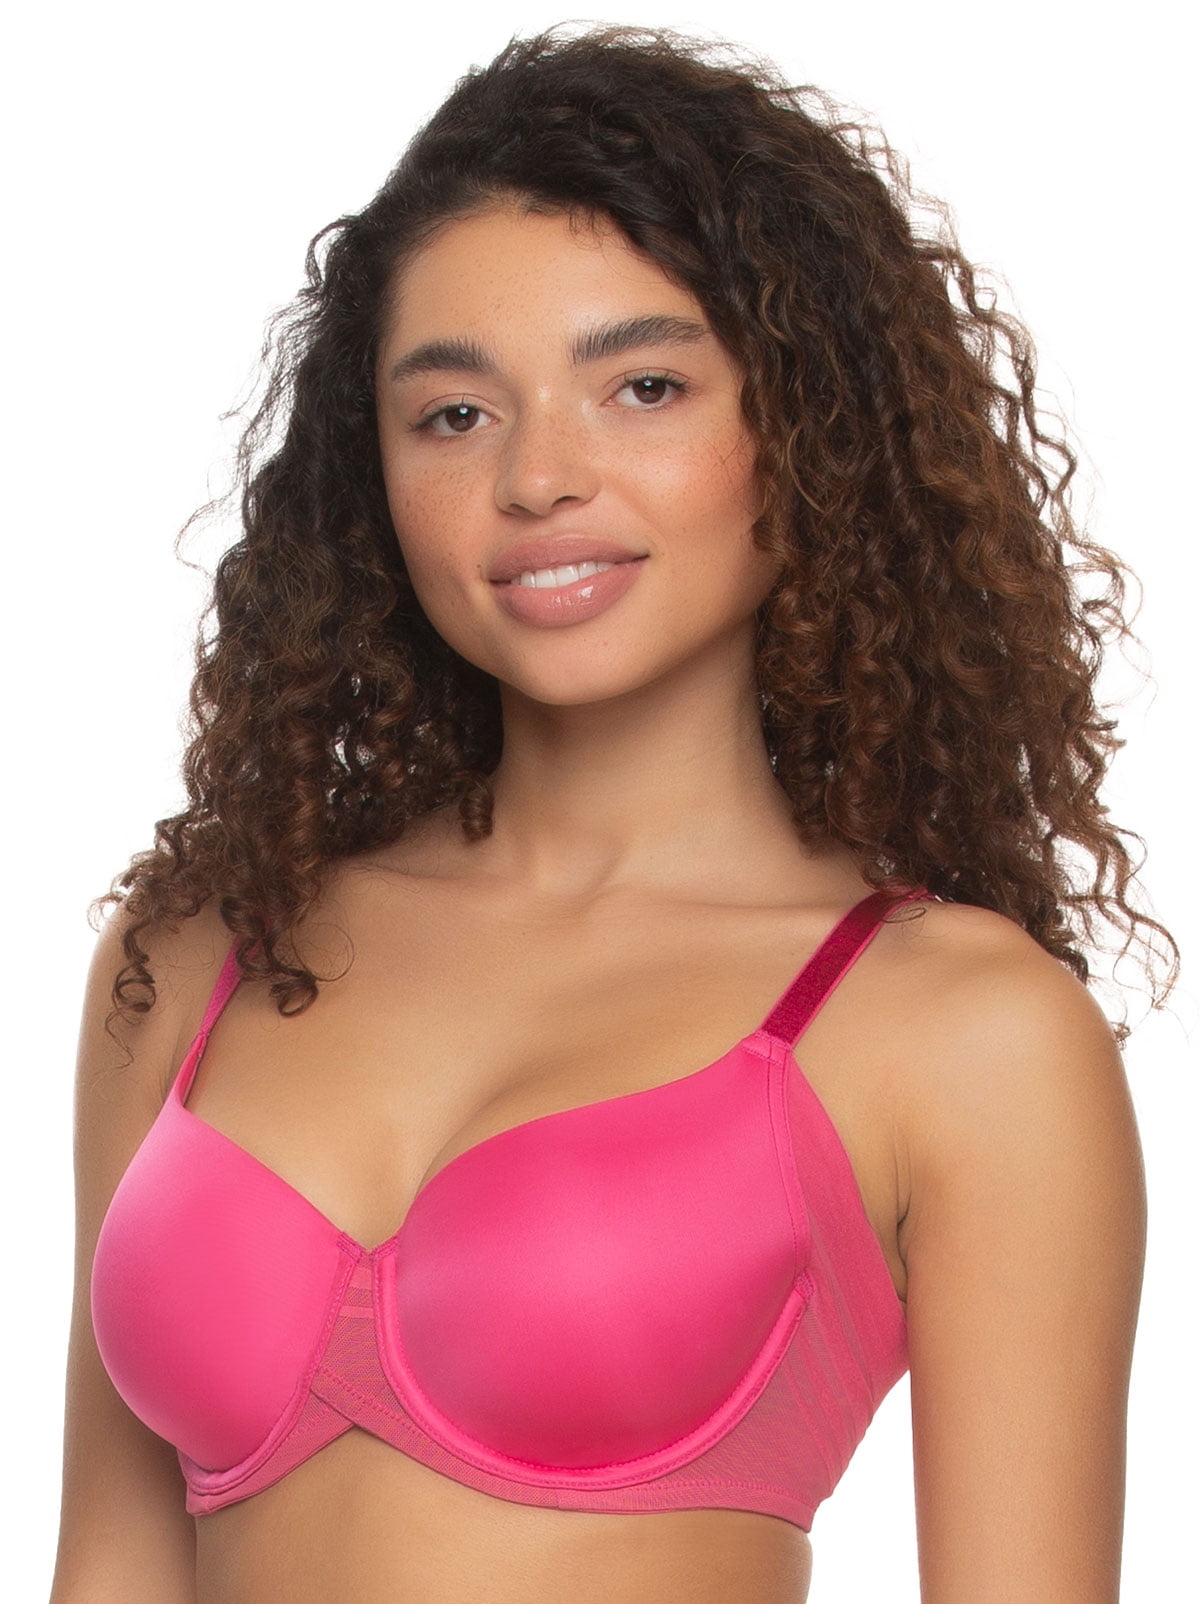 Paramour Women's Marvelous Side Smoother Bra - Fuchsia Rose 34dd : Target